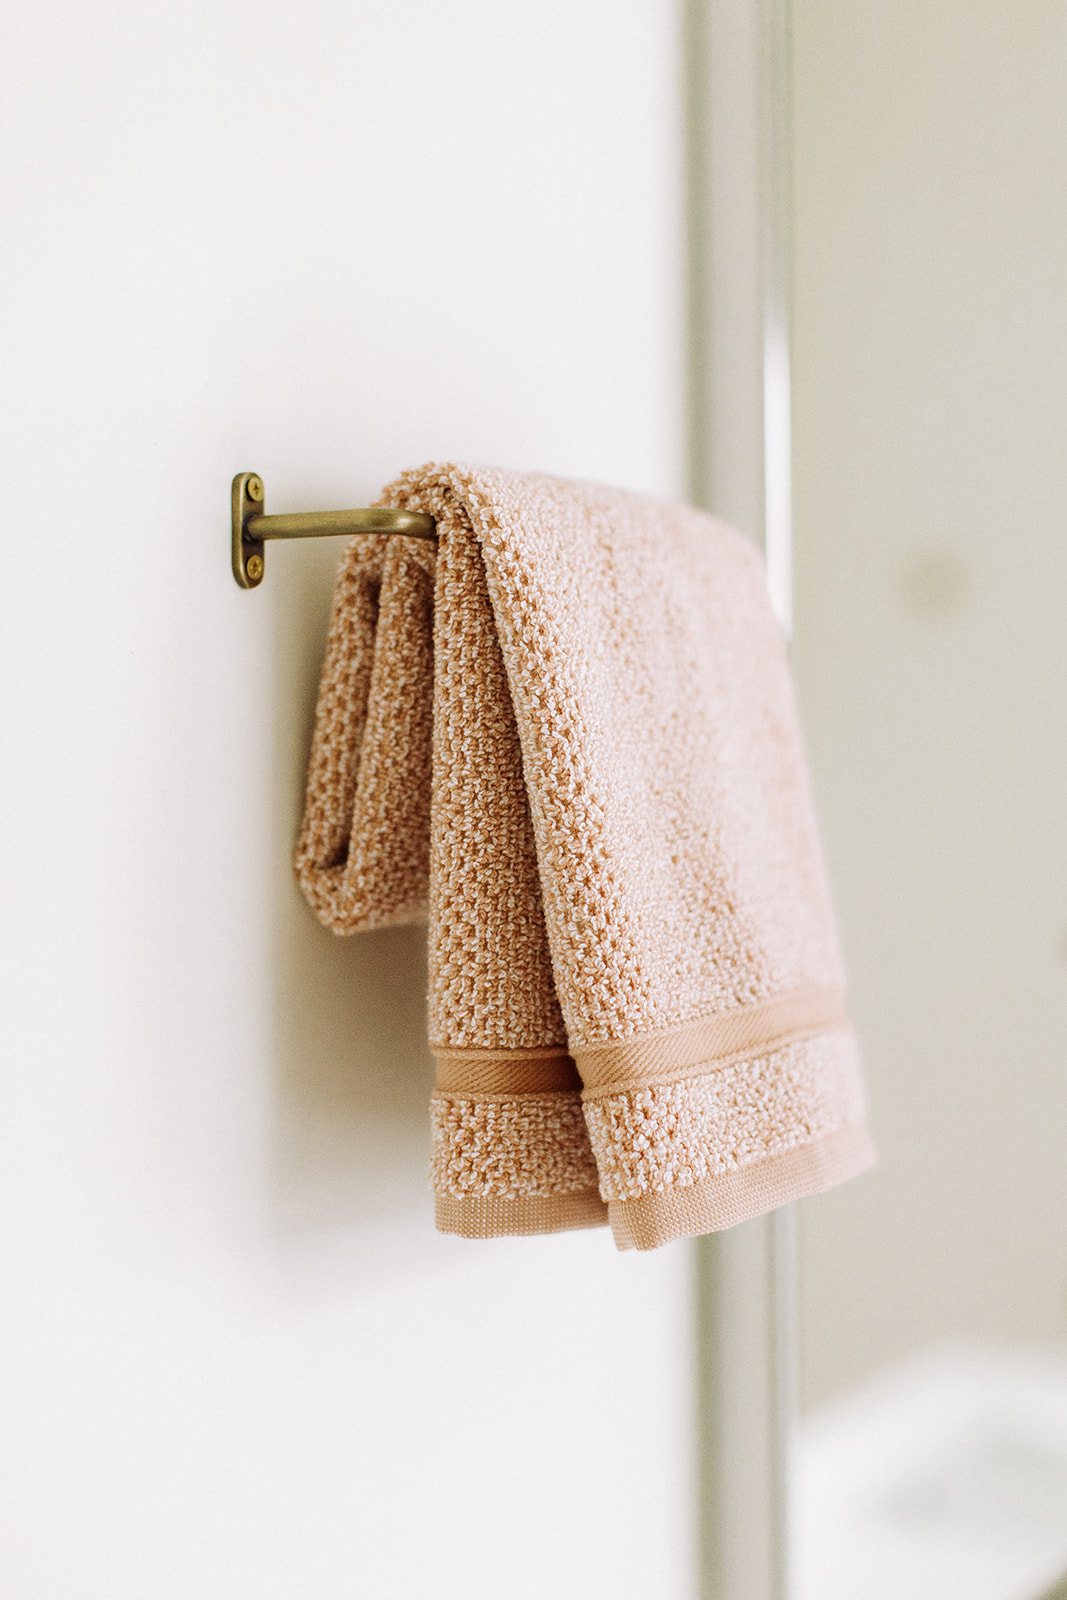 target-hand-towel-blush-clay Revealing the After! Our Full Bathroom Renovation